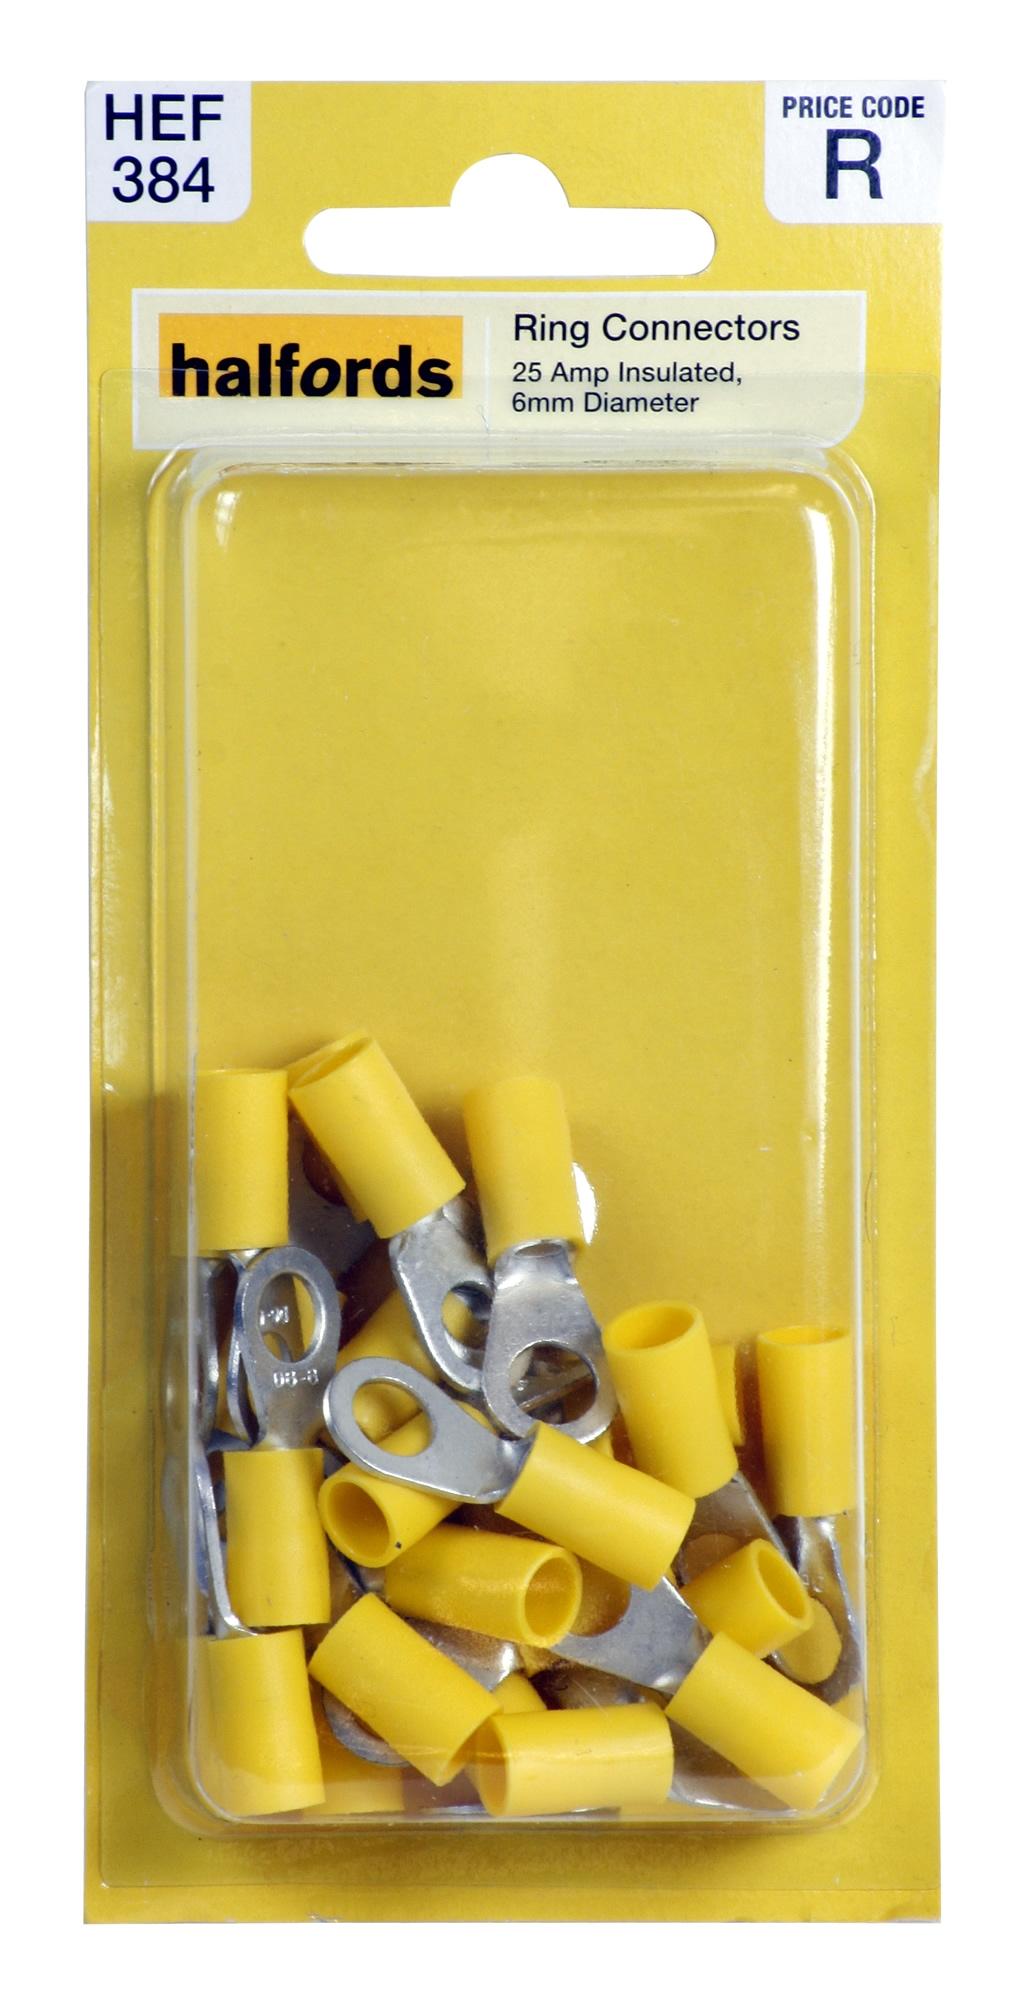 Halfords Ring Connectors 25 Amp Insulated 6Mm Hef384